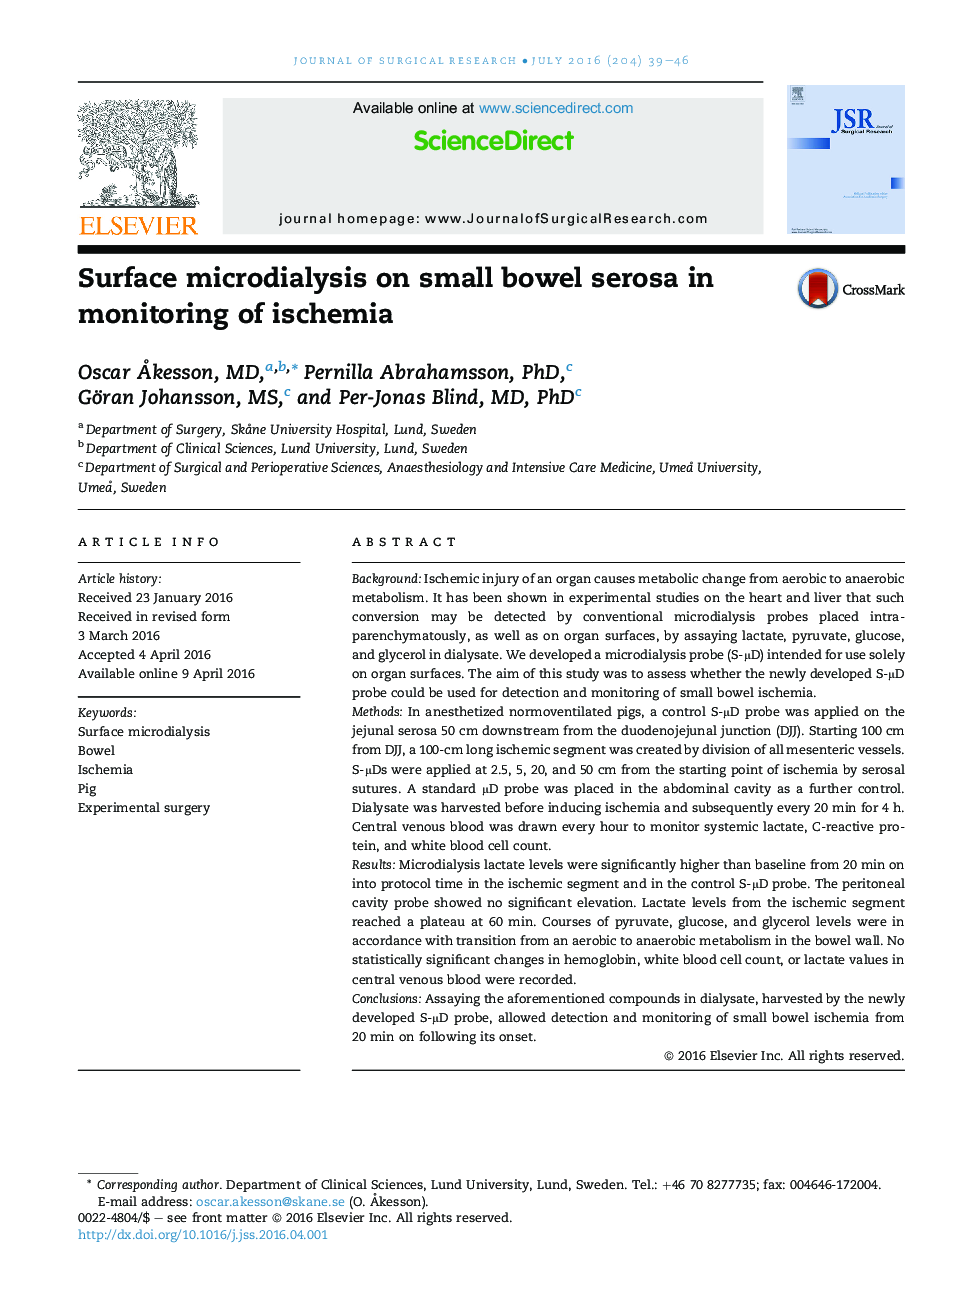 Surface microdialysis on small bowel serosa in monitoring of ischemia